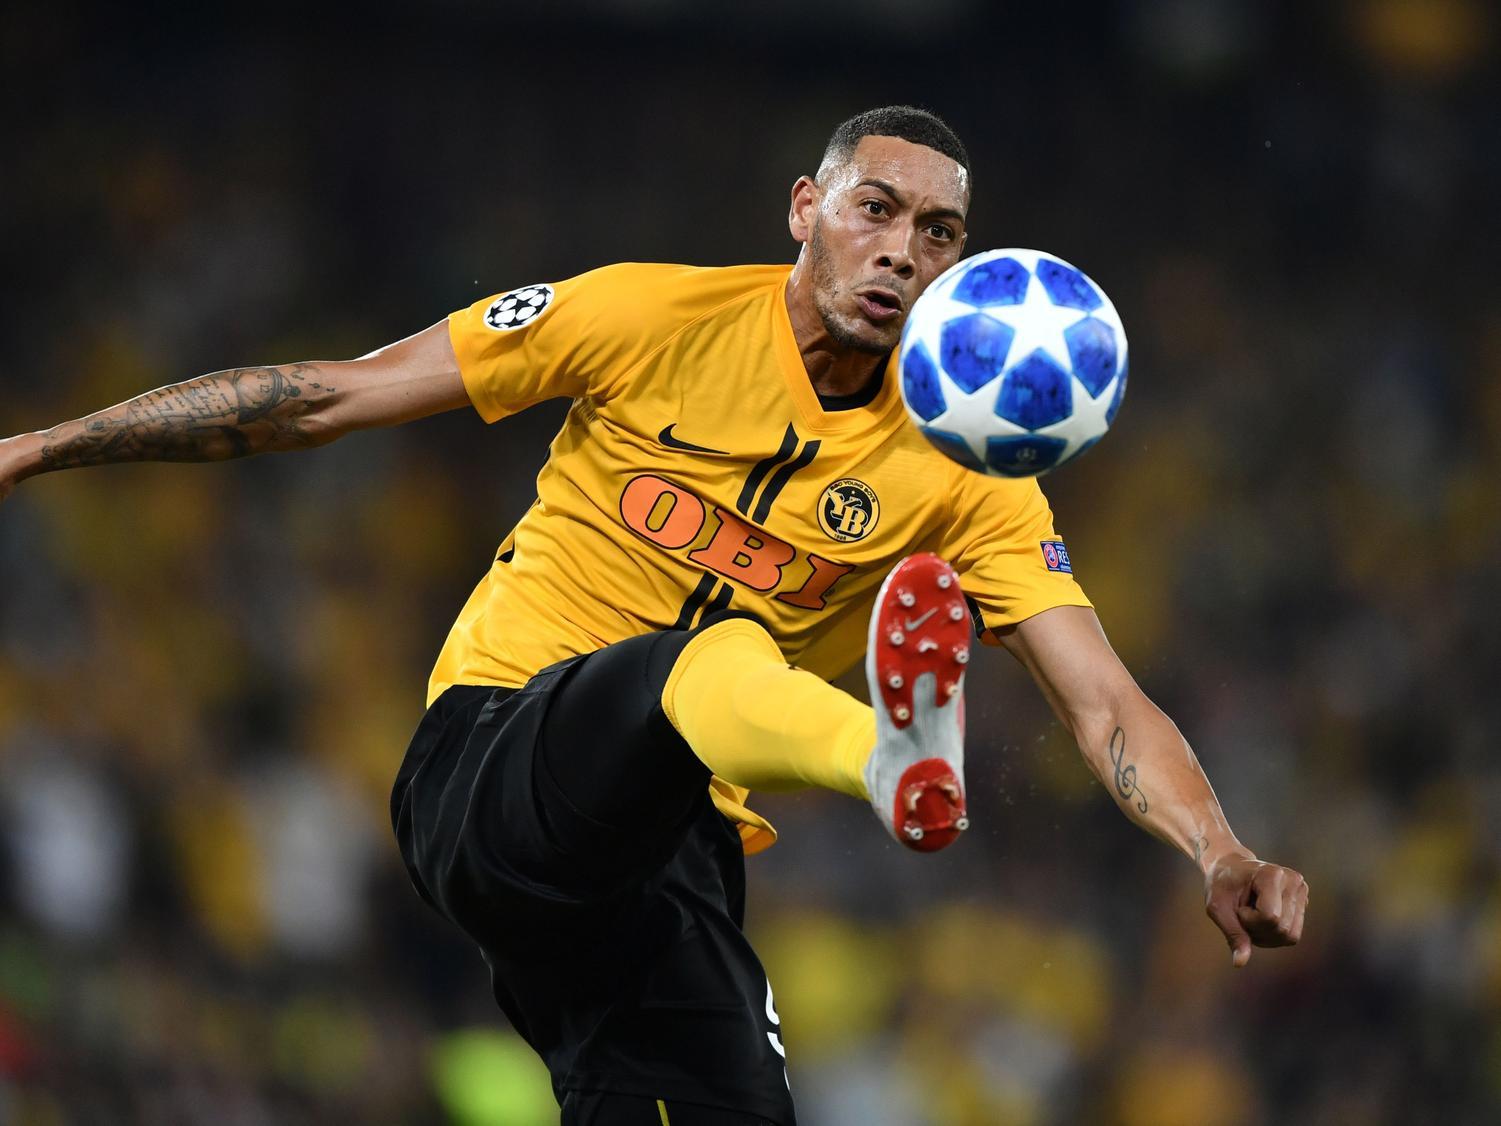 Nottingham Forest are being tipped as potential contenders to snap up former PSG striker Guillaume Hoarau, who has scored 113 goals in 162 goals for Swiss side Young Boys. (Nottingham Post)